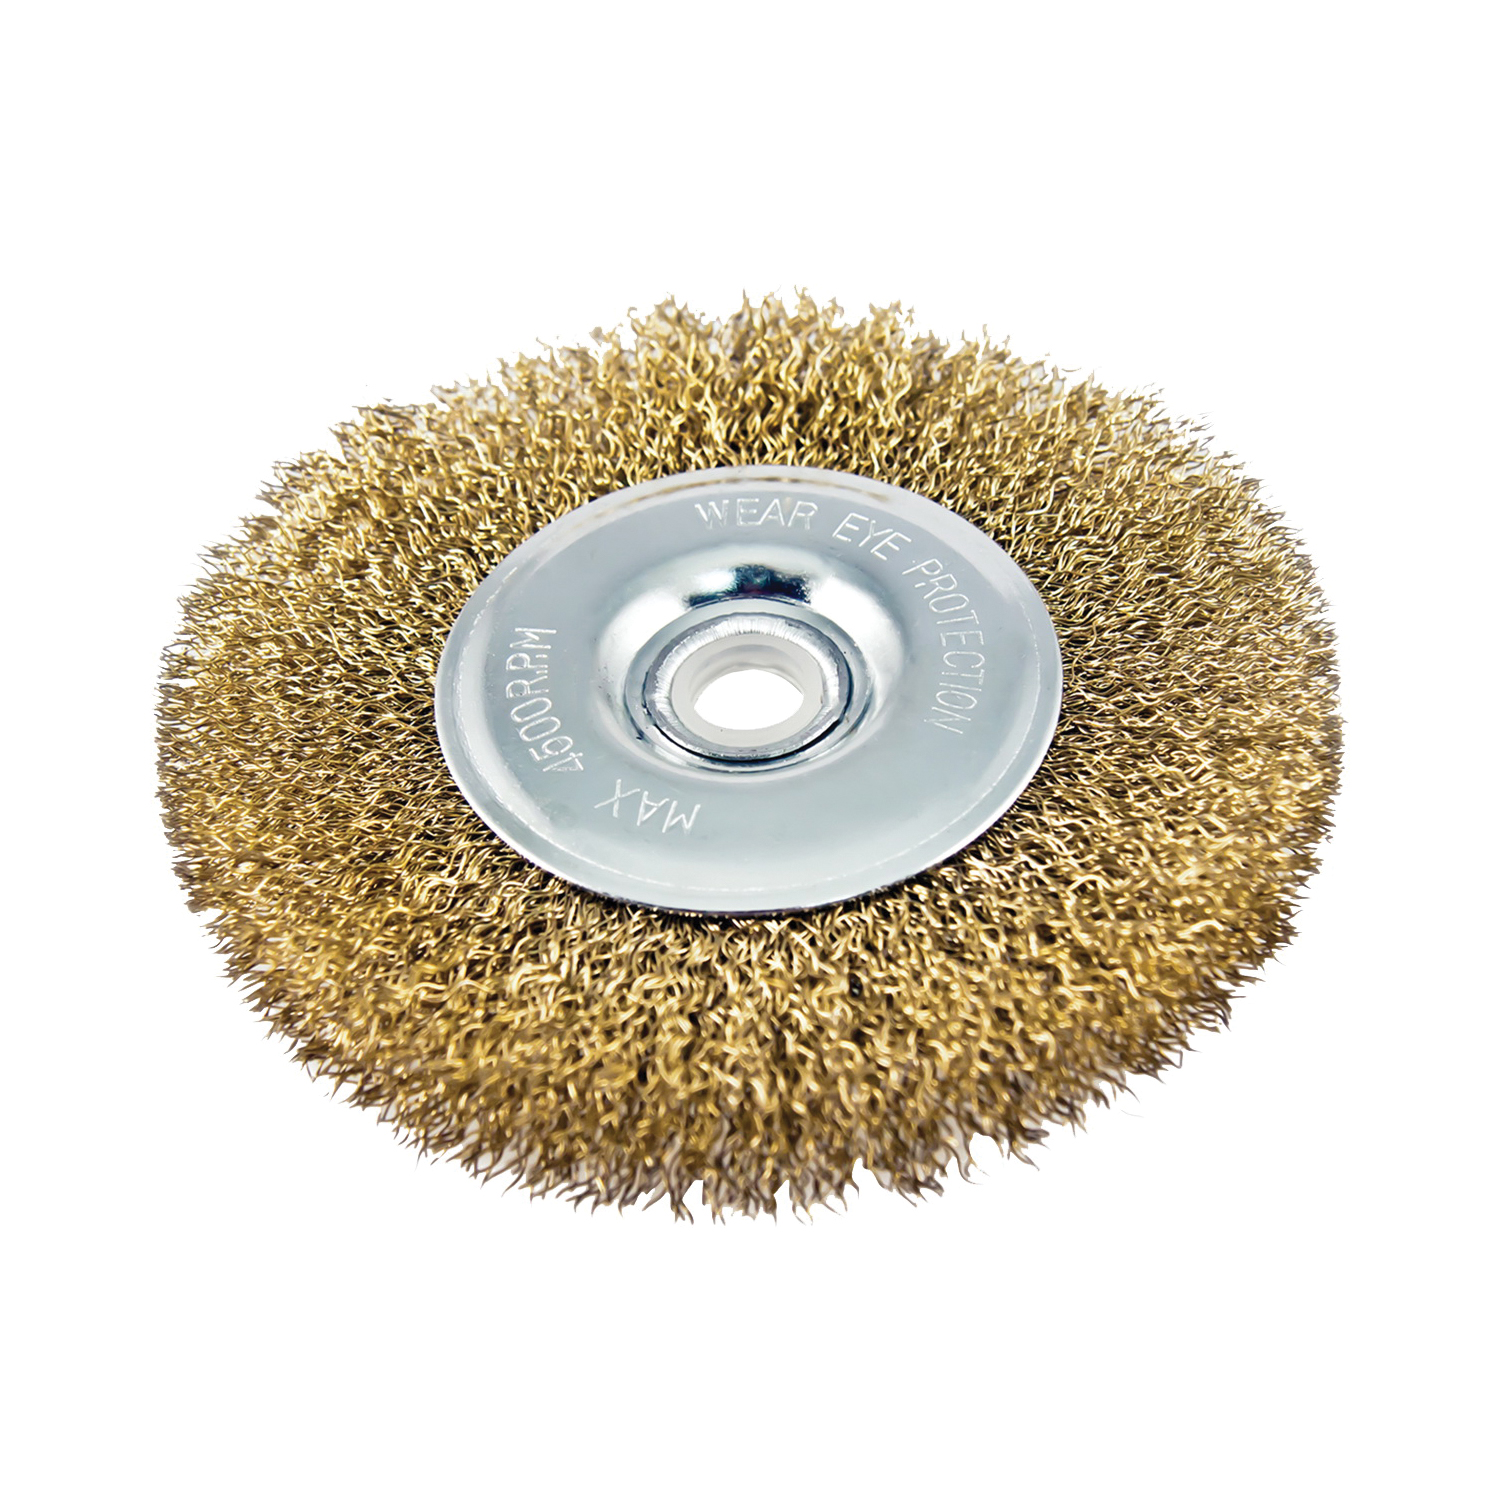 322631OR Wire Wheel Brush with Hole, 4 in Dia, 5/8 in Arbor Hole, 1/2 in Adapter Ring Arbor/Shank